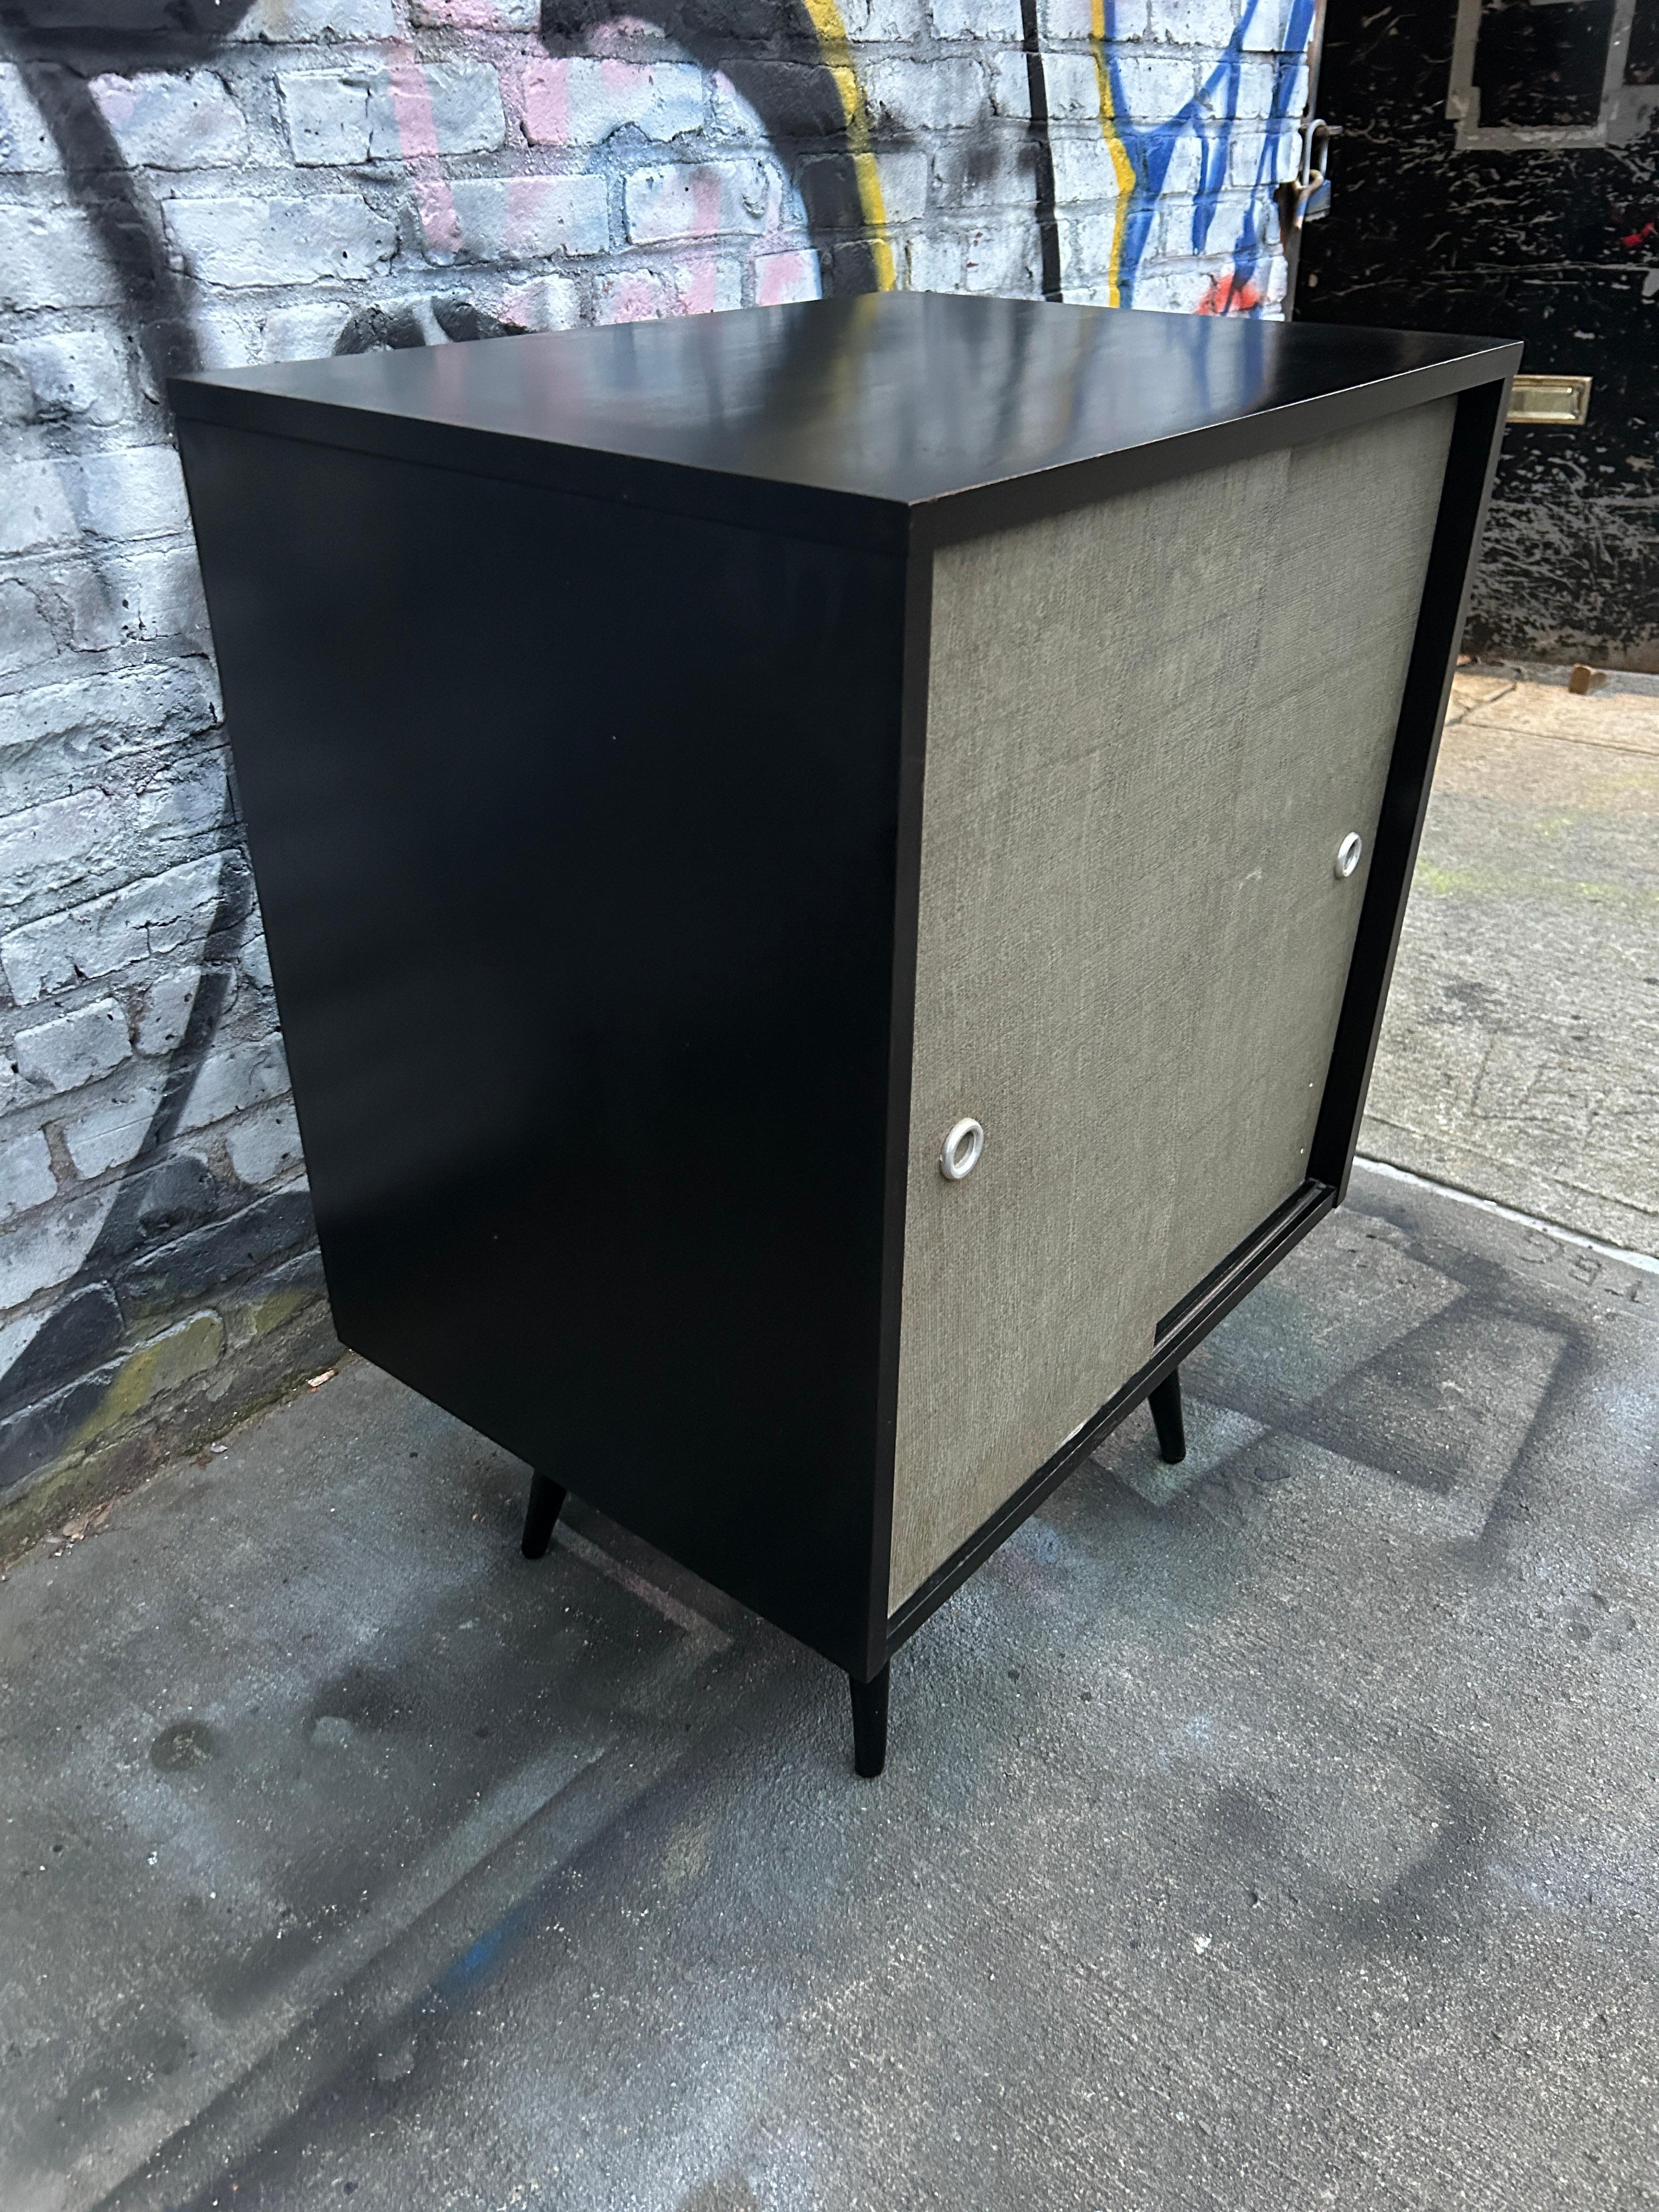 American Mid-Century Small Cabinet by Paul McCobb circa 1950 Planner Group #1512 Black For Sale